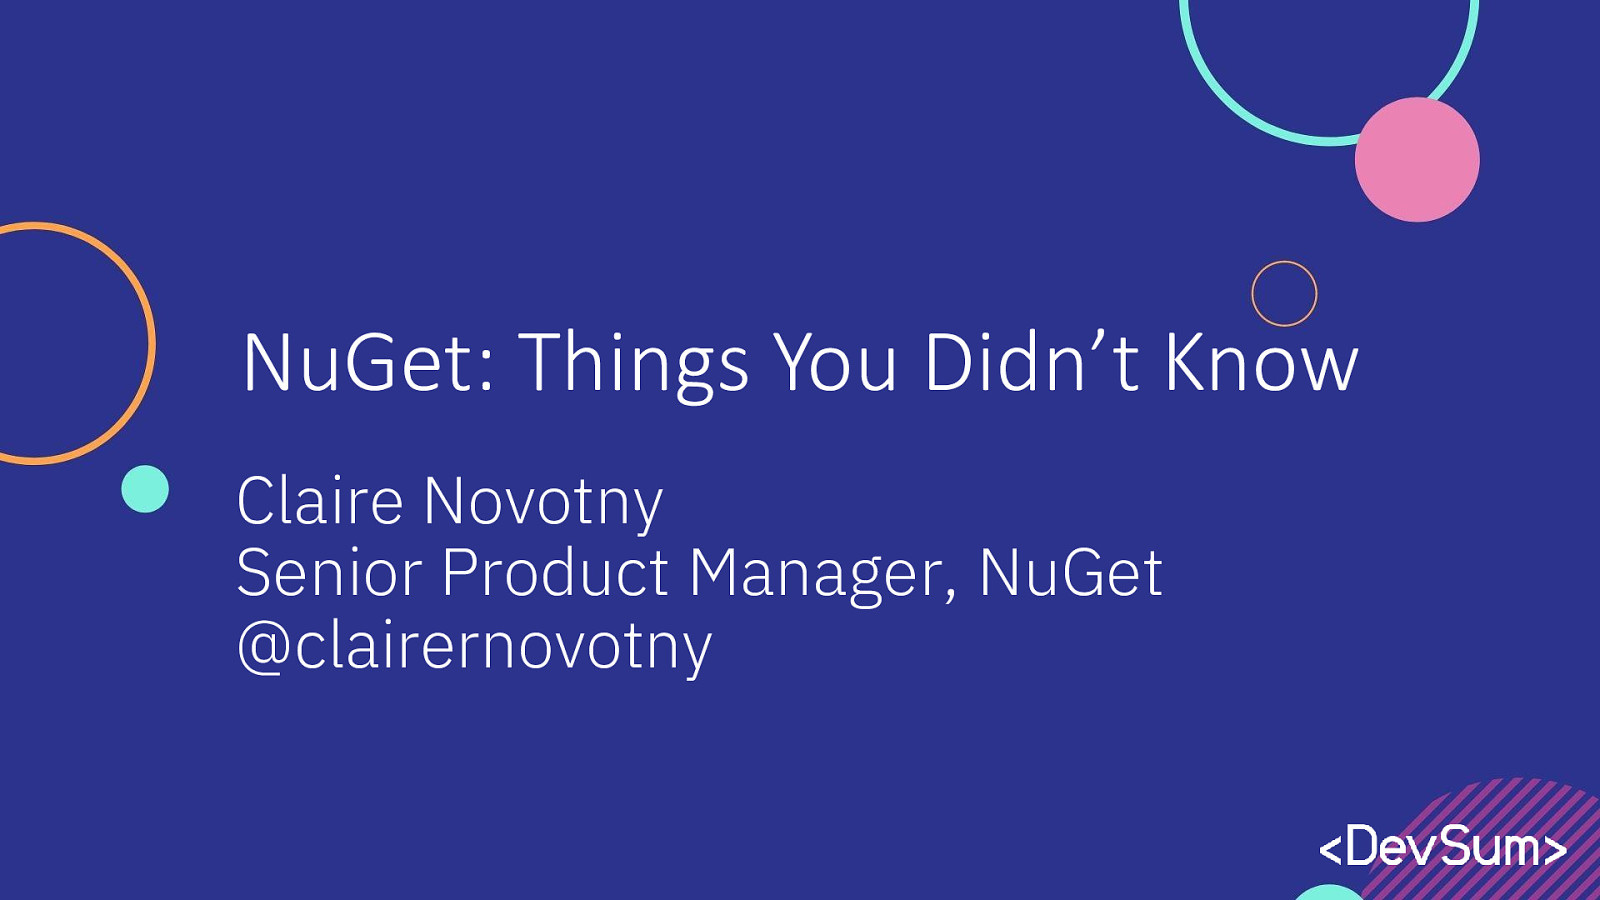 NuGet: Things You Didn’t Know